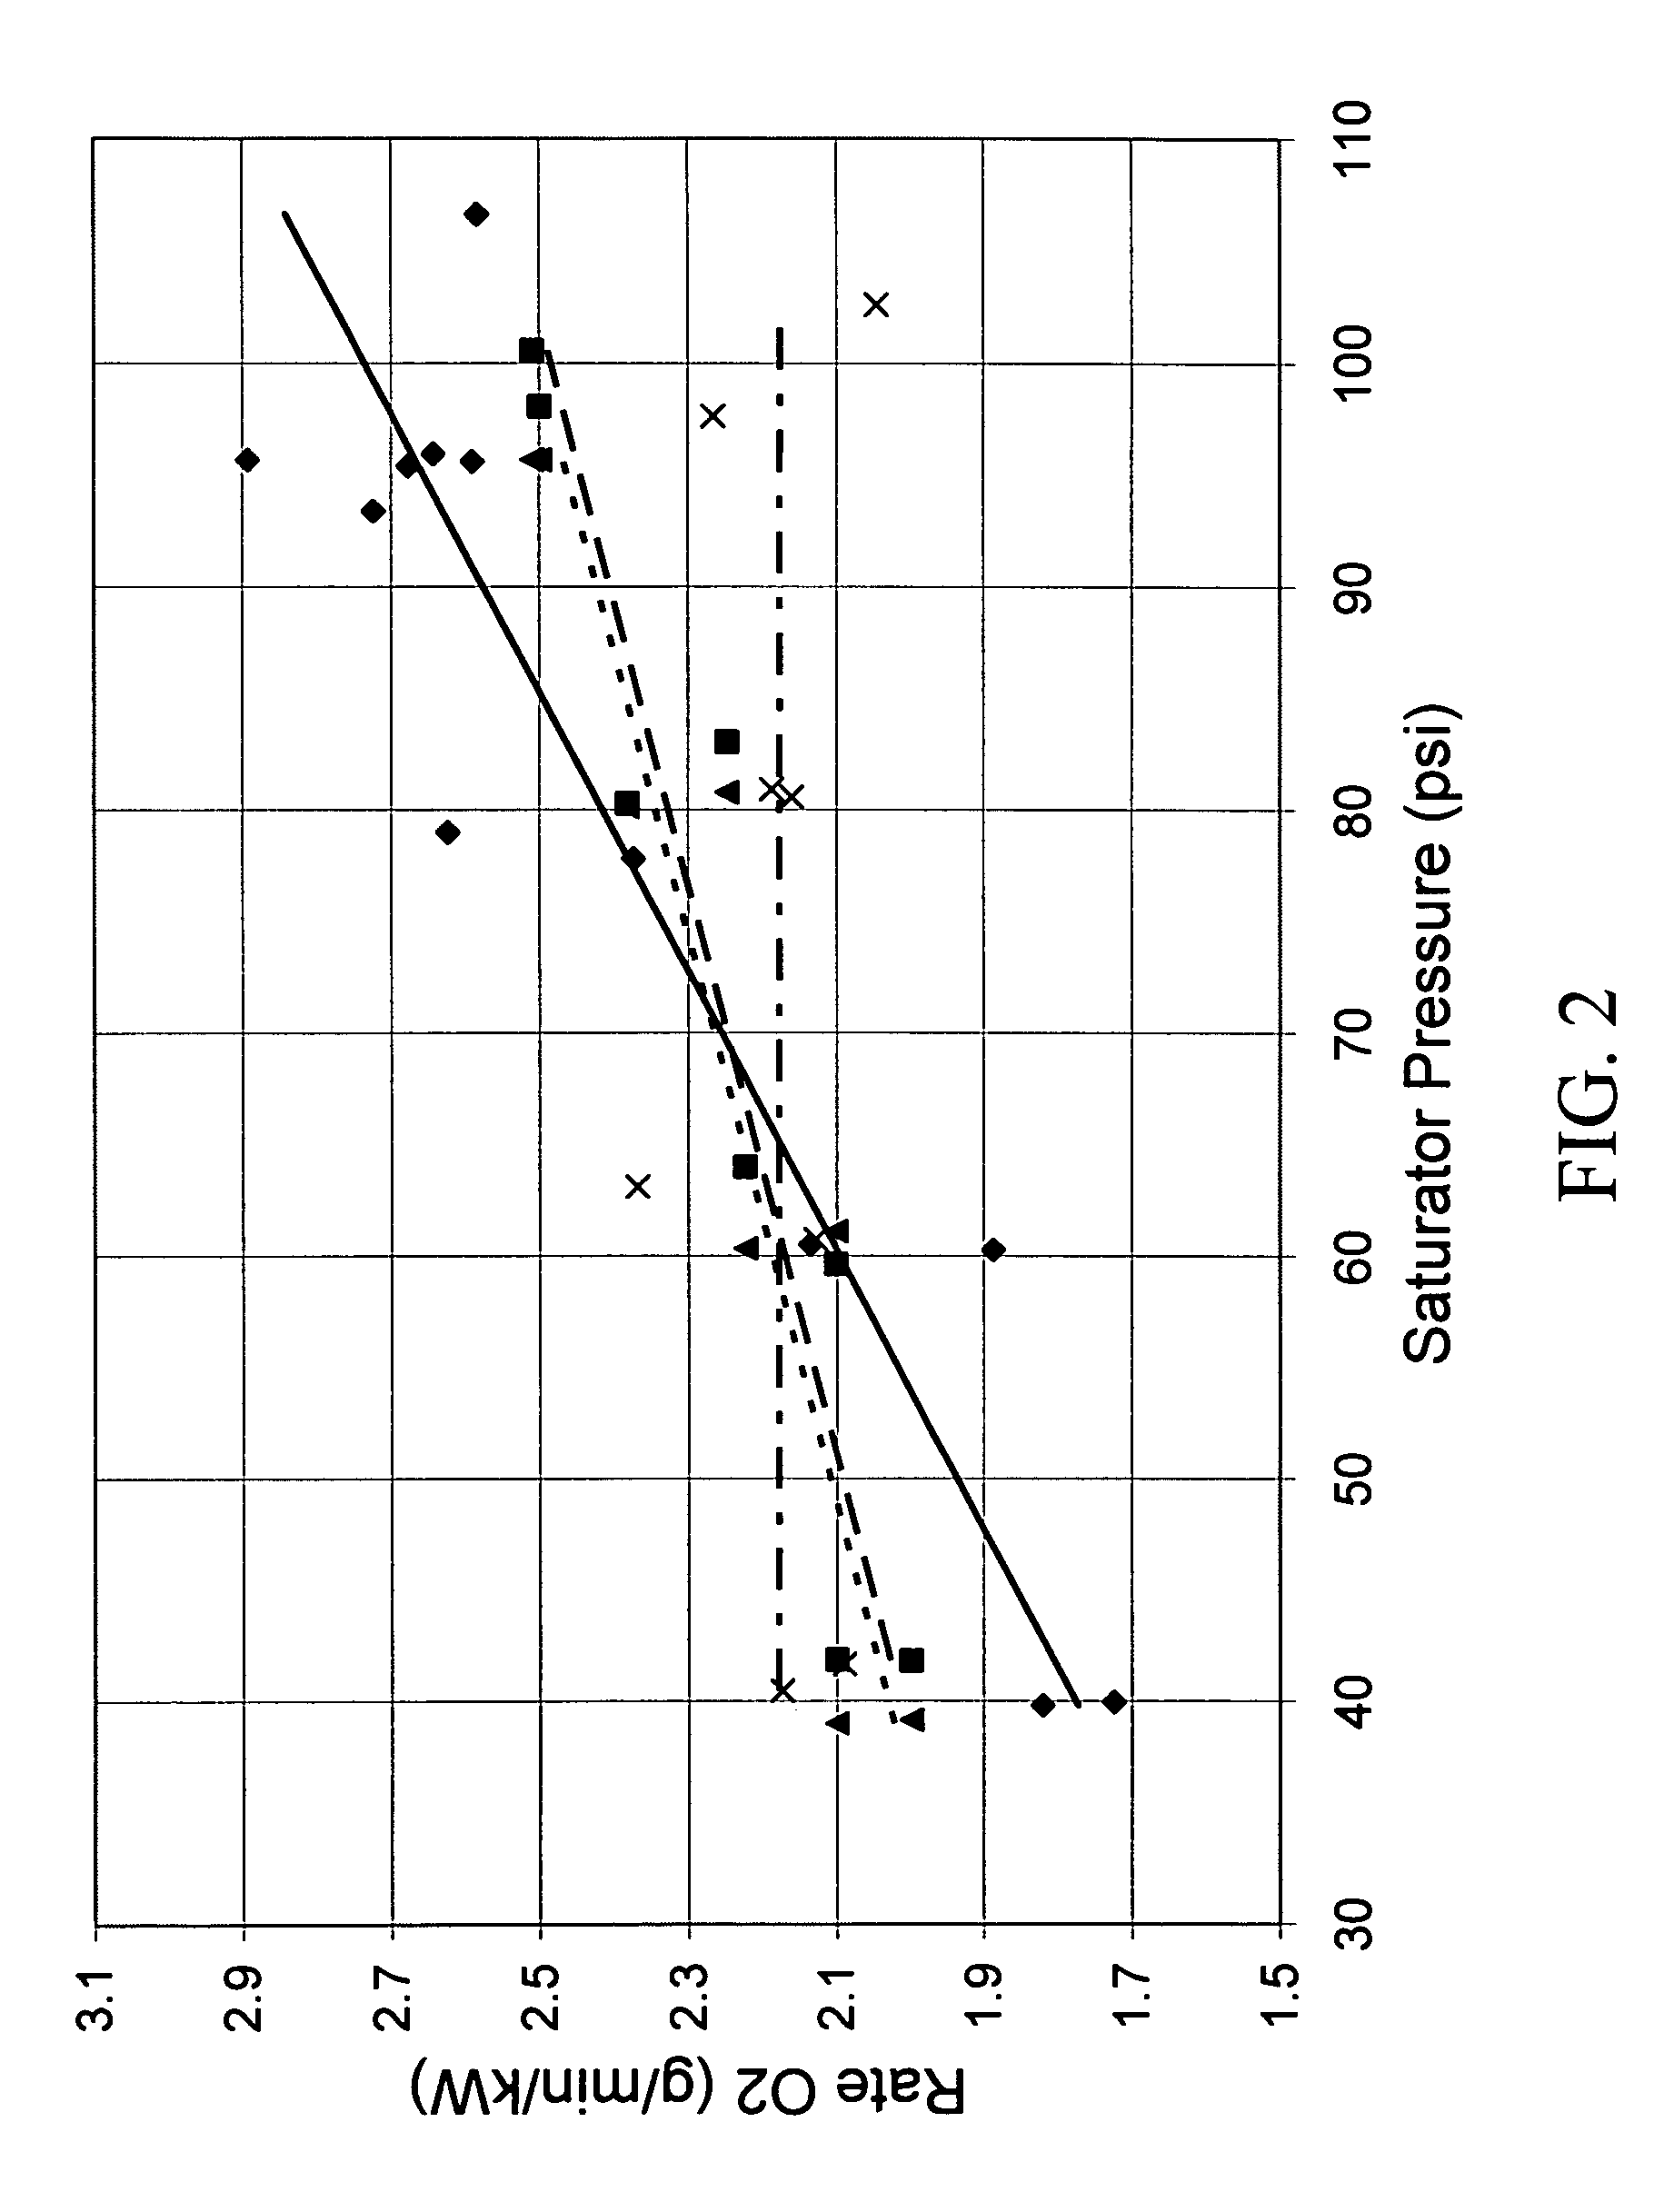 System and method for dissolving gases in liquids